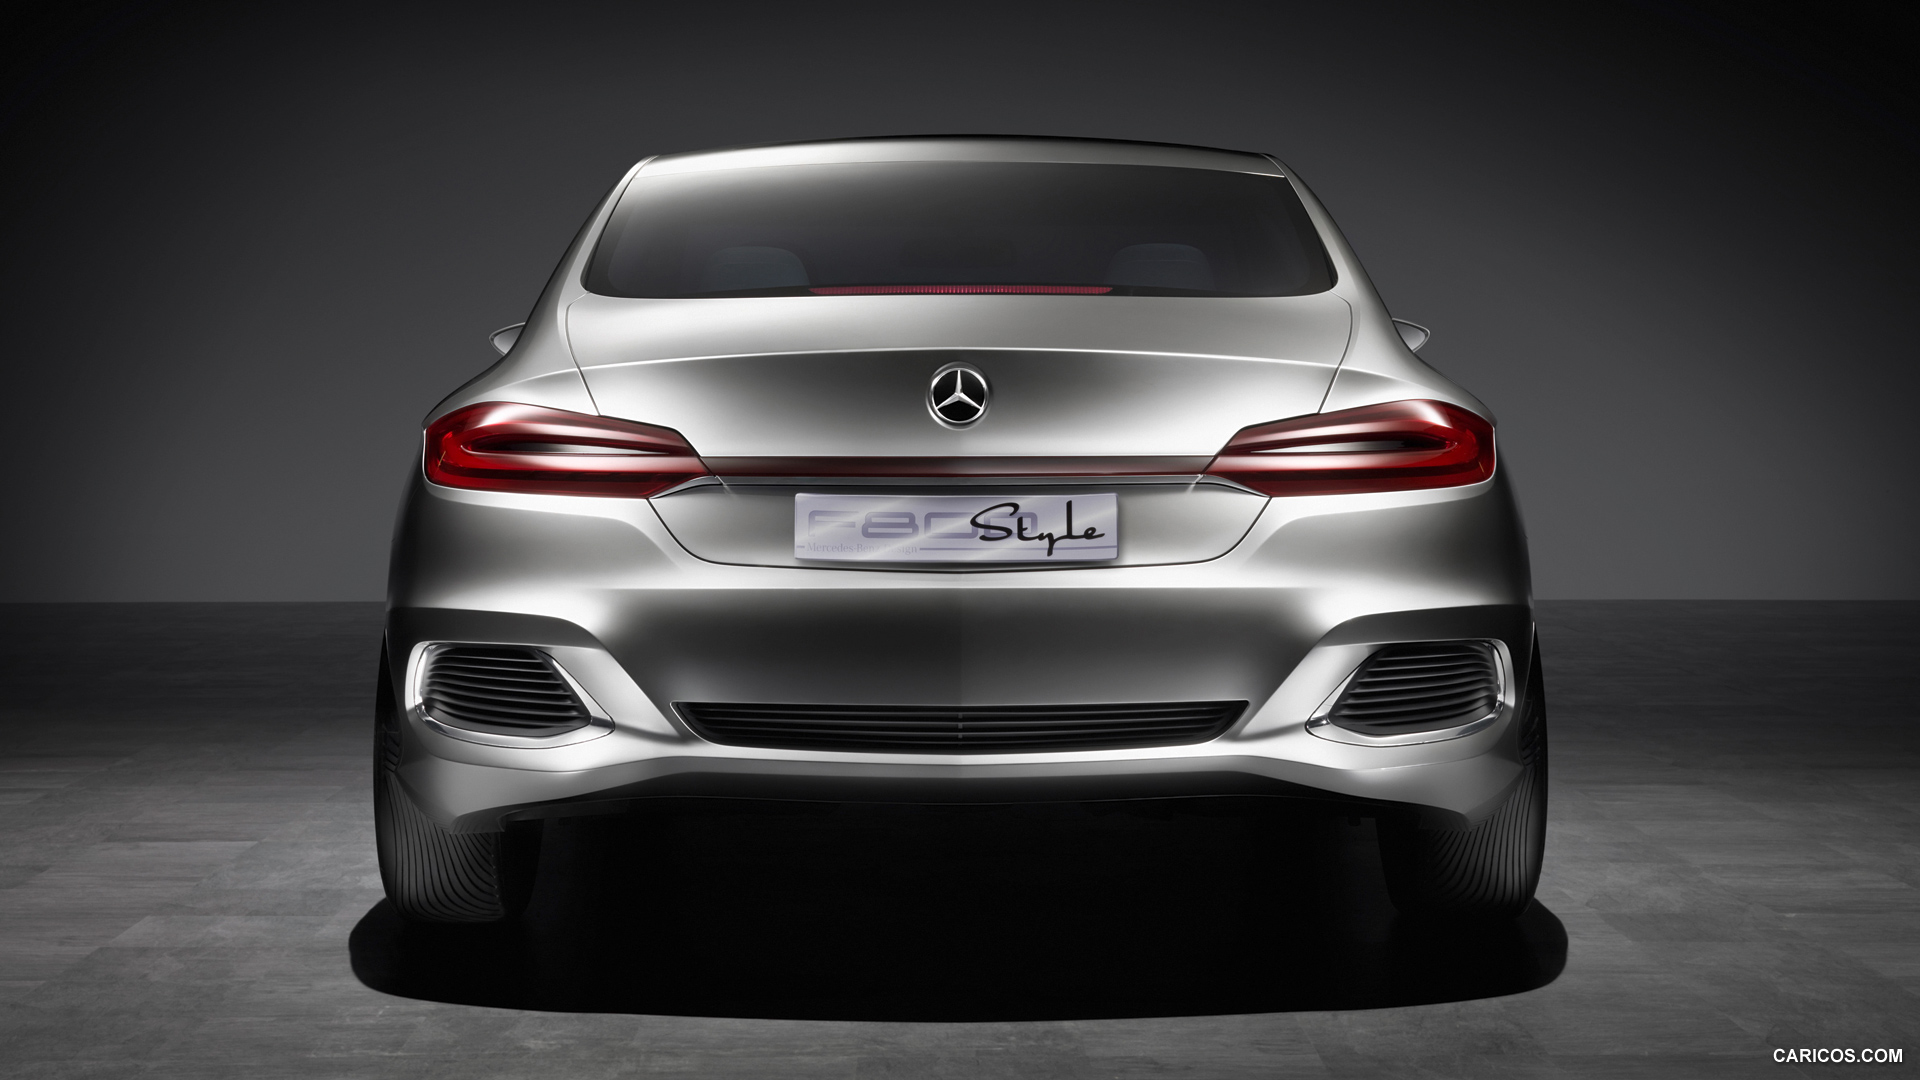 Mercedes-Benz F800 Style Concept (2010)  - Rear Angle , #110 of 120